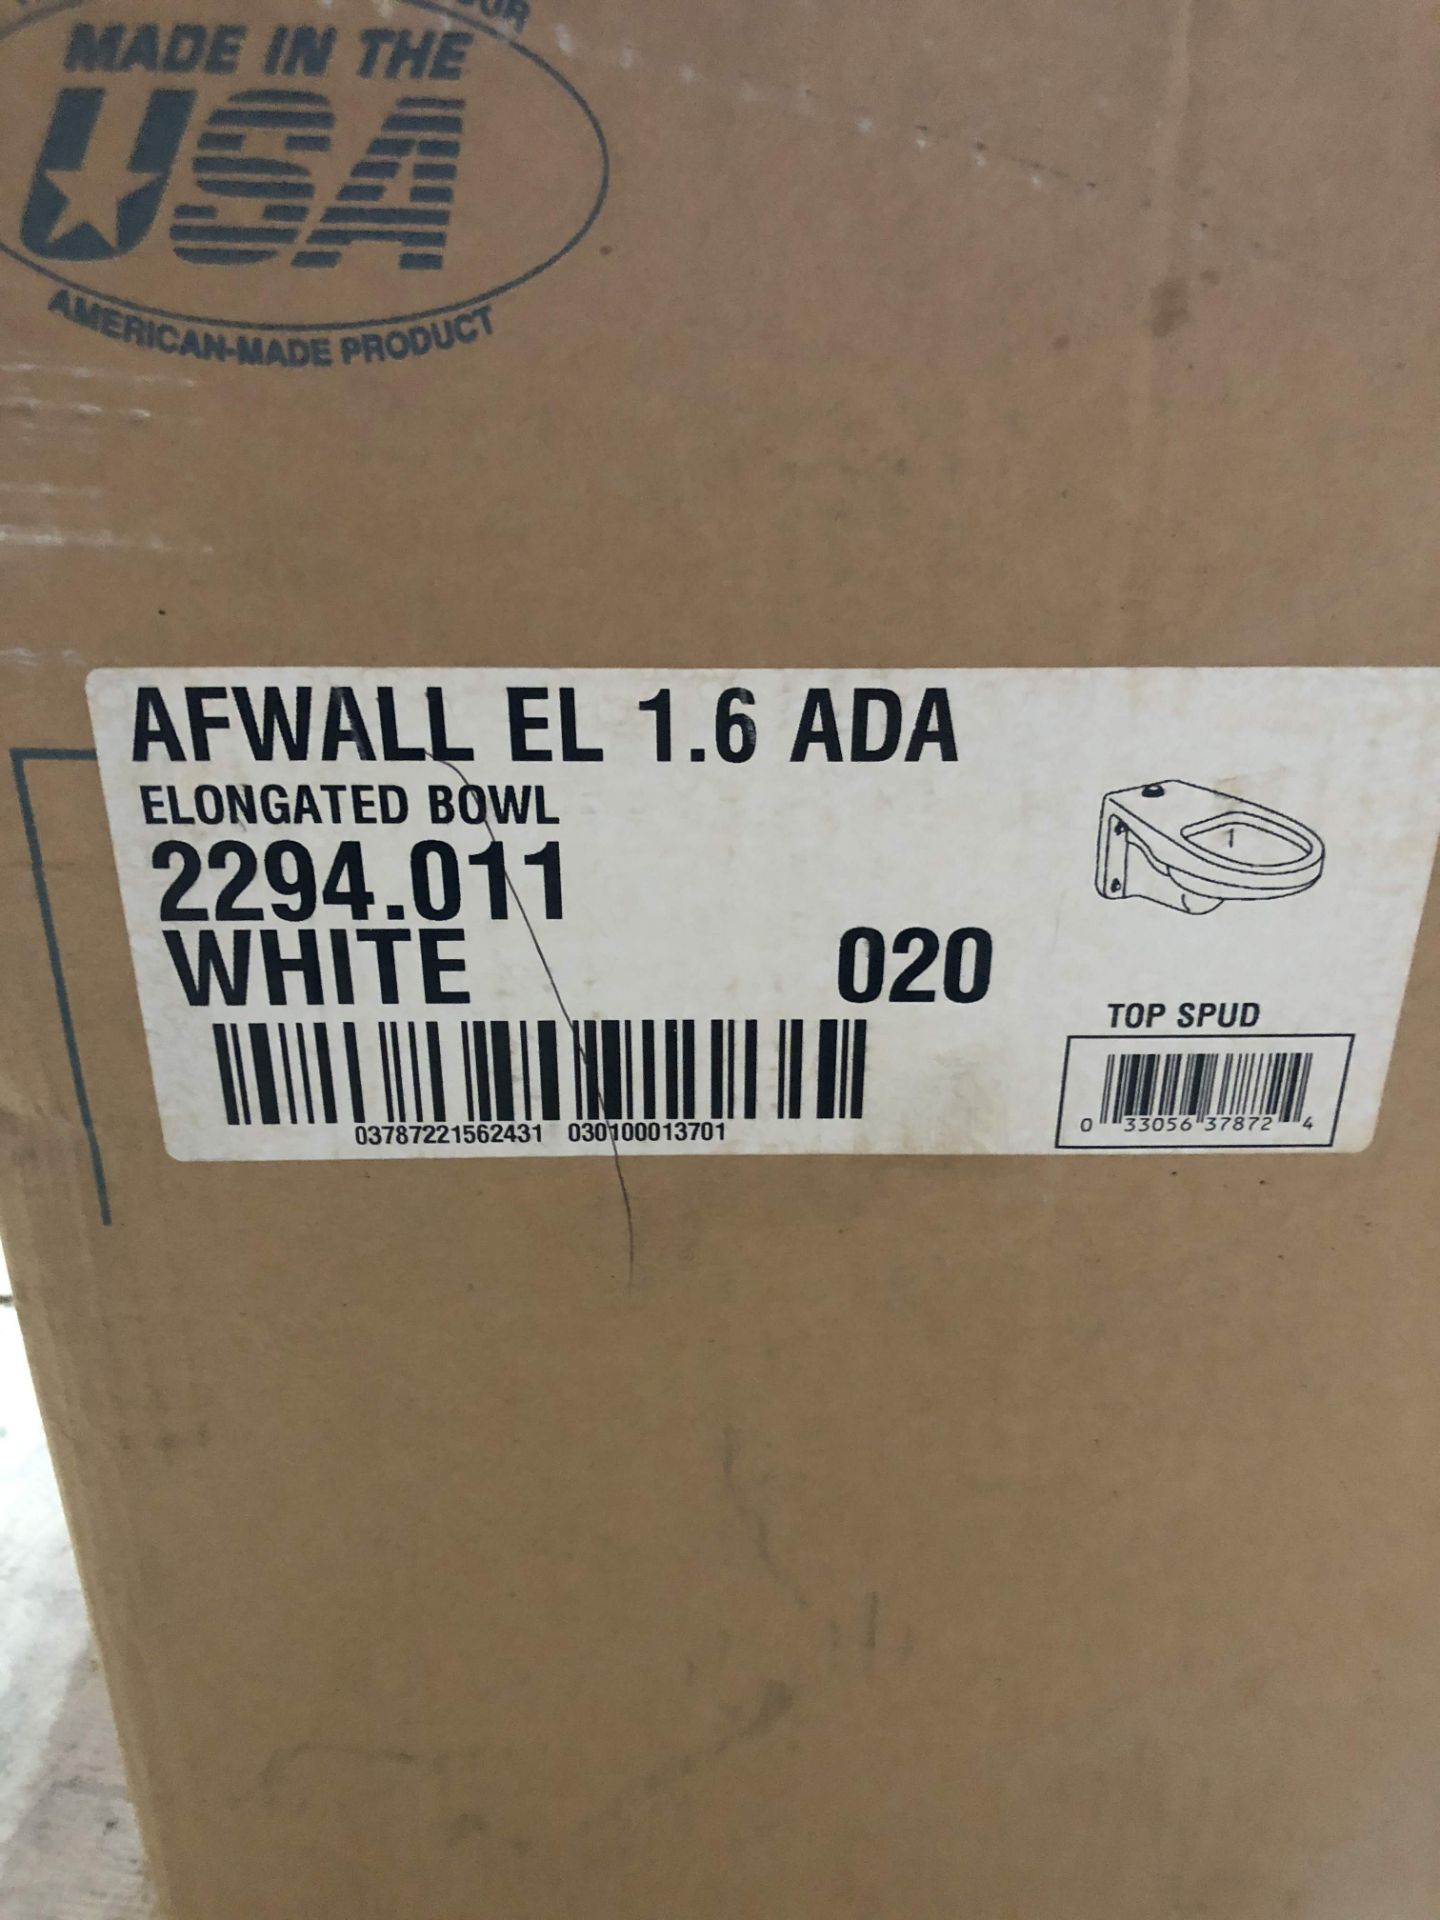 AFWALL ELONGATED BOWL (WHITE) 2294011(LOCATED AT 2696 E LYTLE 5 POINTS ROAD, DAYTON, OH 45458) - Bild 2 aus 3